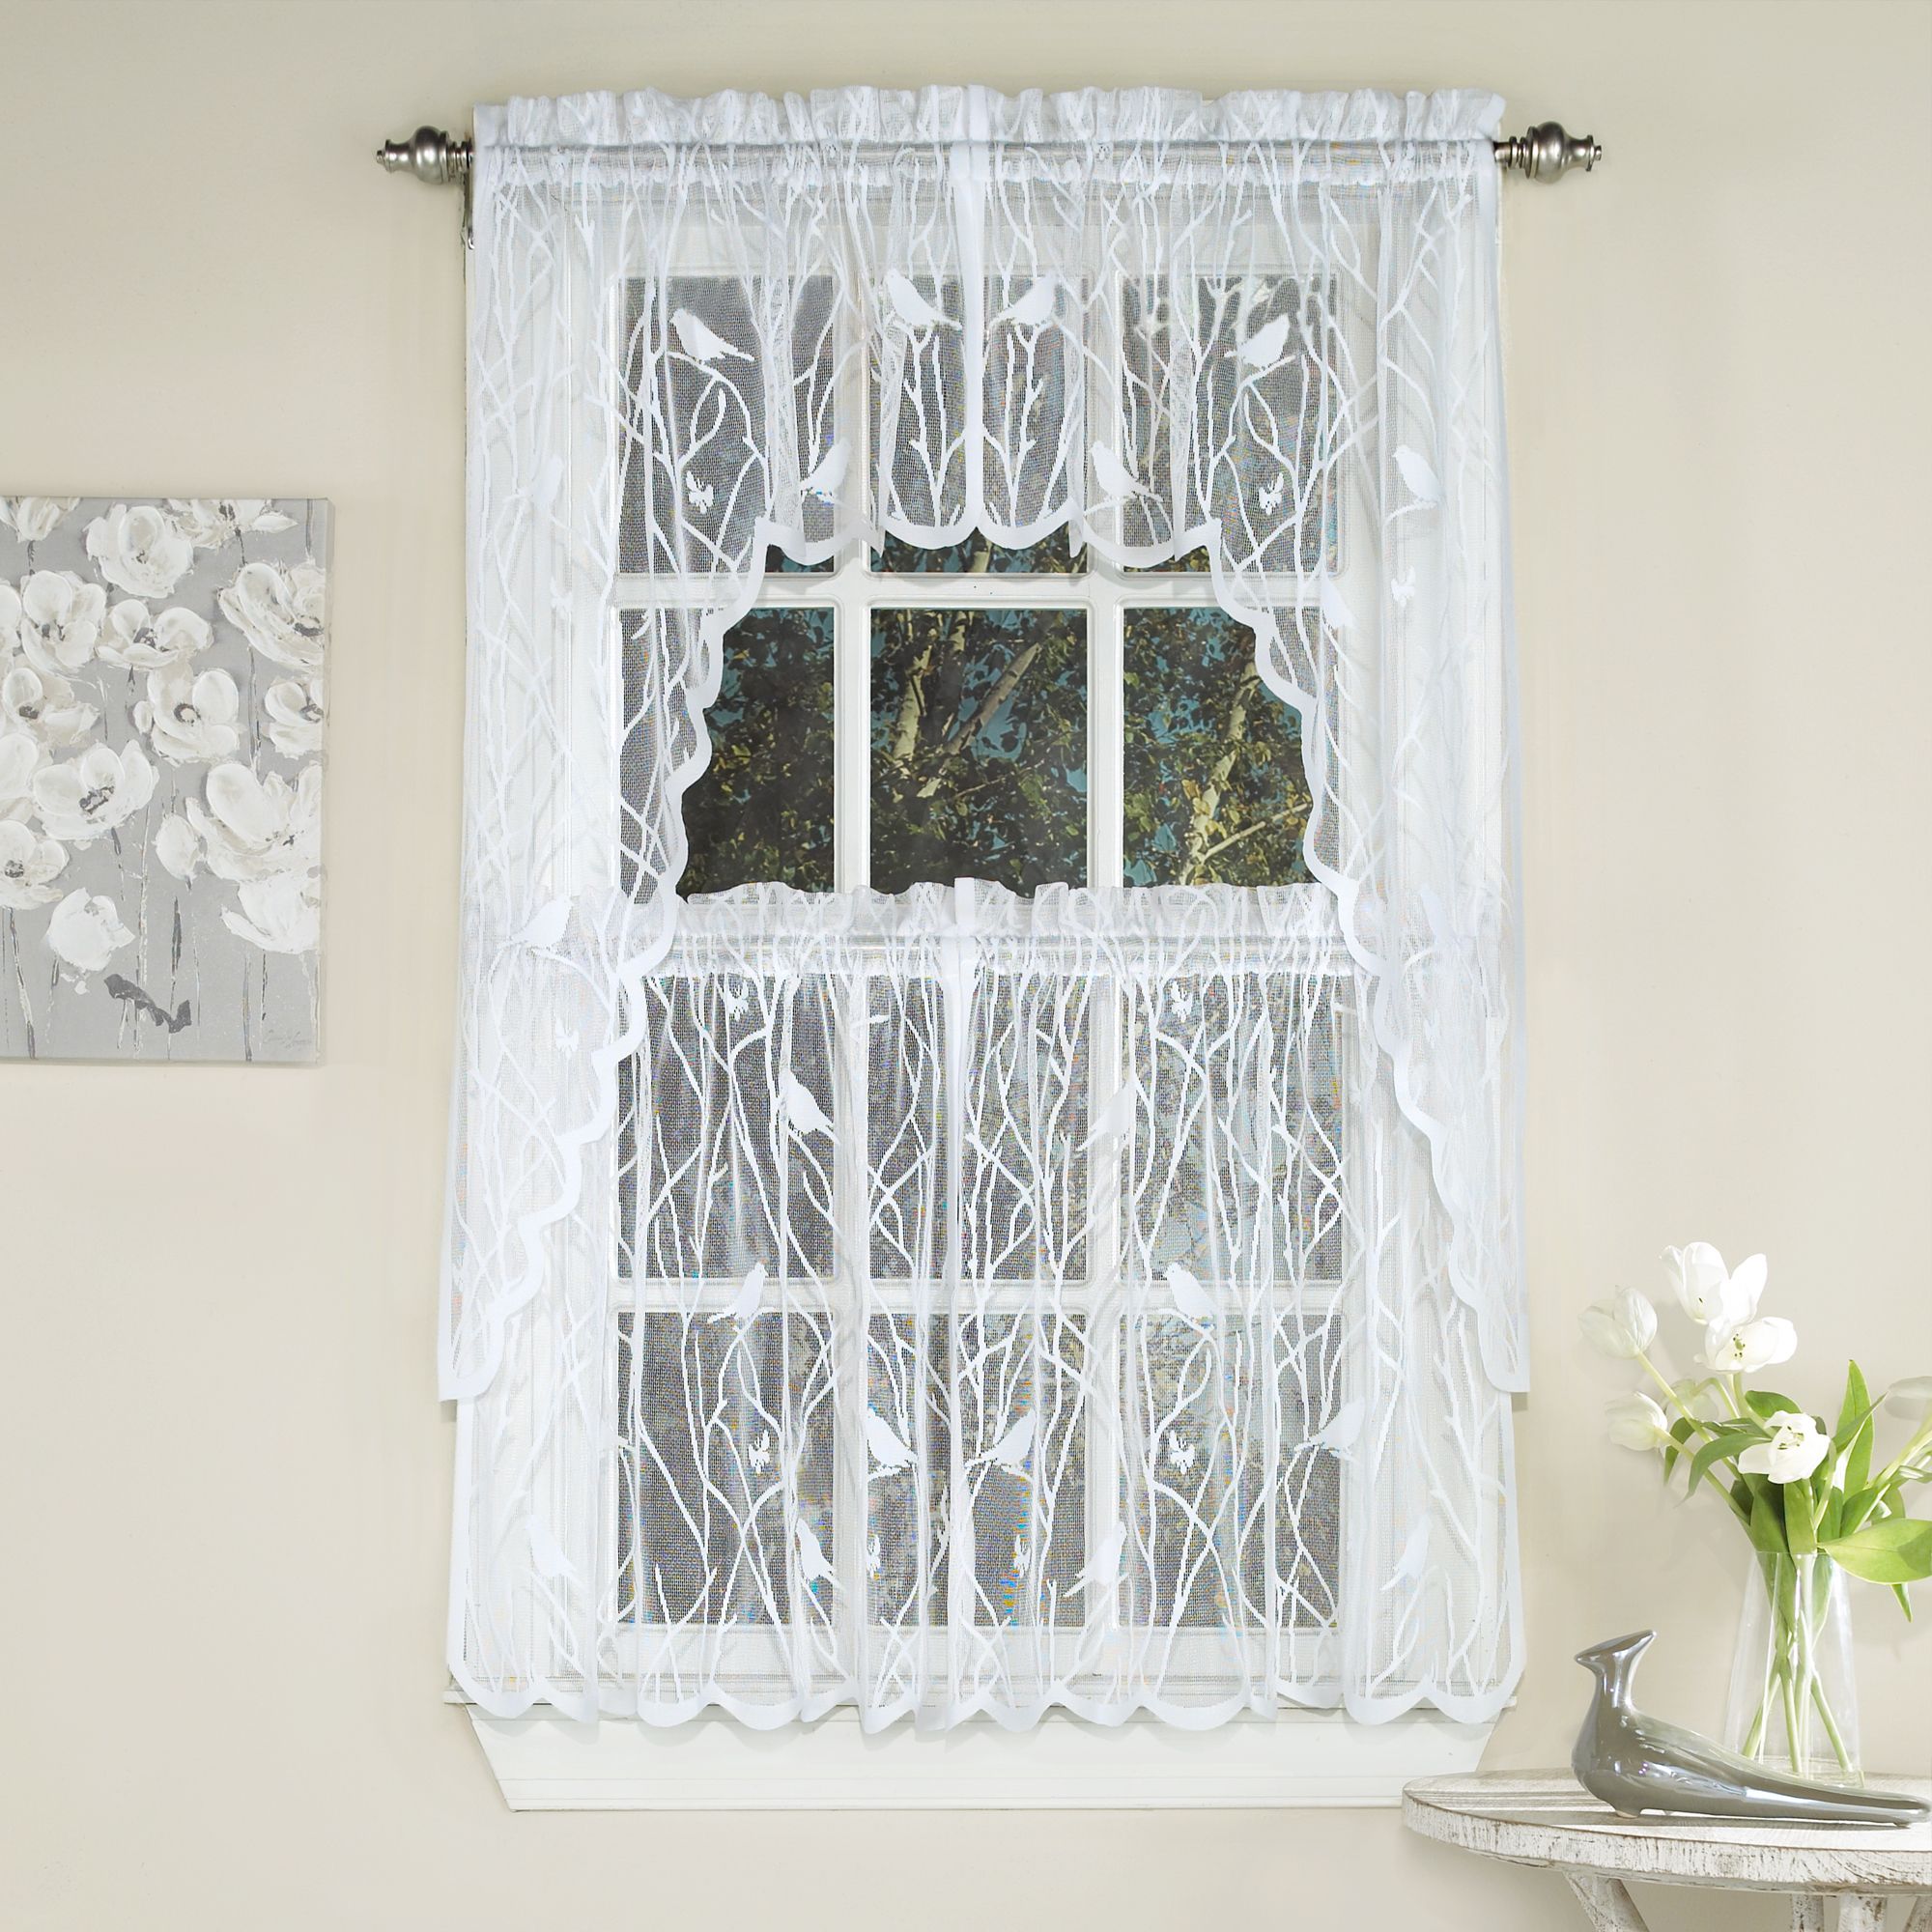 Details About Knit Lace Bird Motif Kitchen Window Curtain Tiers, Swags Or  Valance White Intended For White Knit Lace Bird Motif Window Curtain Tiers (Photo 1 of 20)